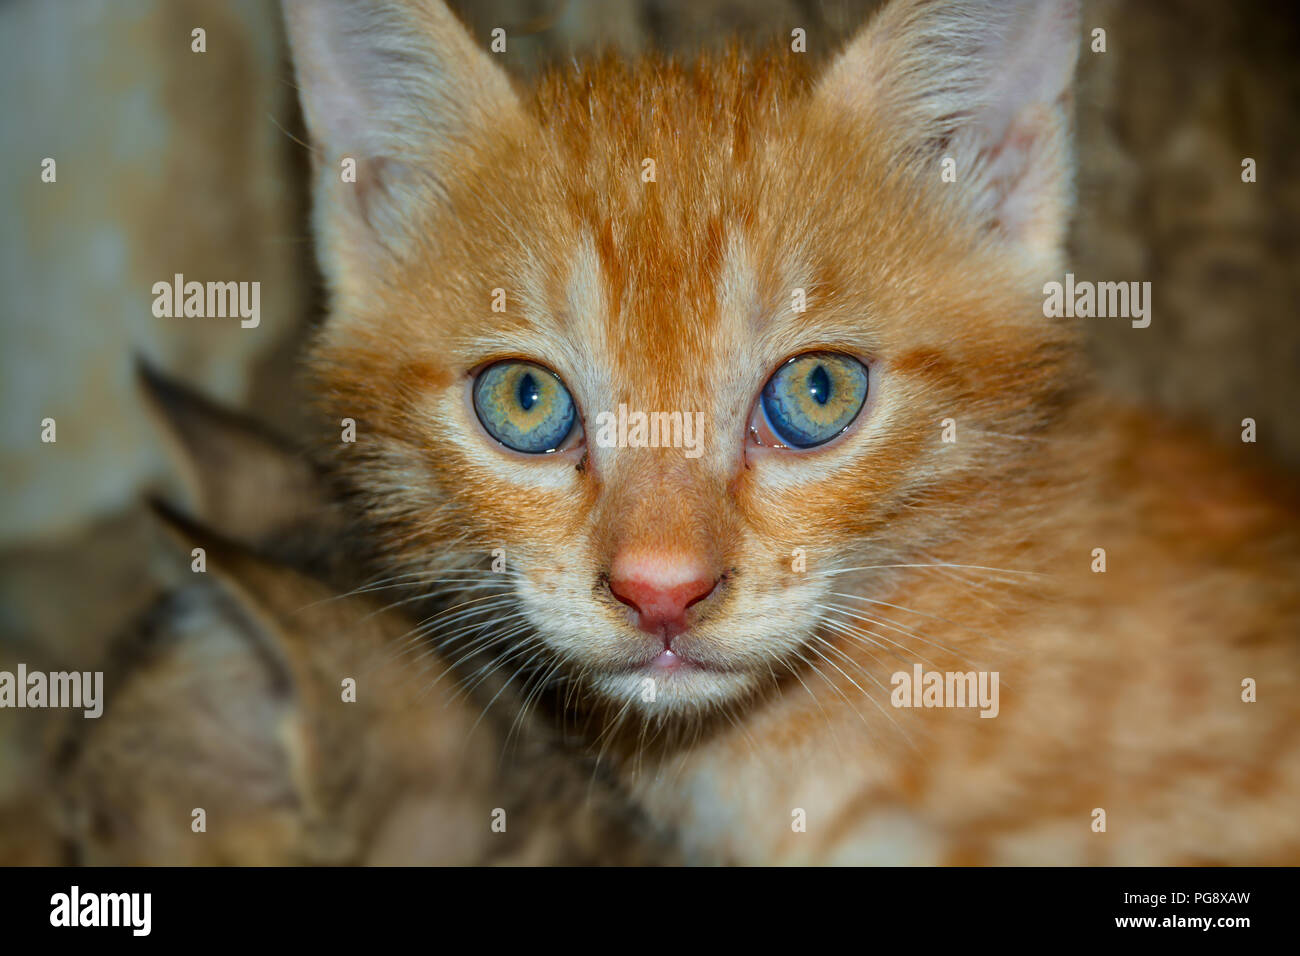 Beautiful fluffy cat with big green and blue eyes staring at the camera. Stock Photo